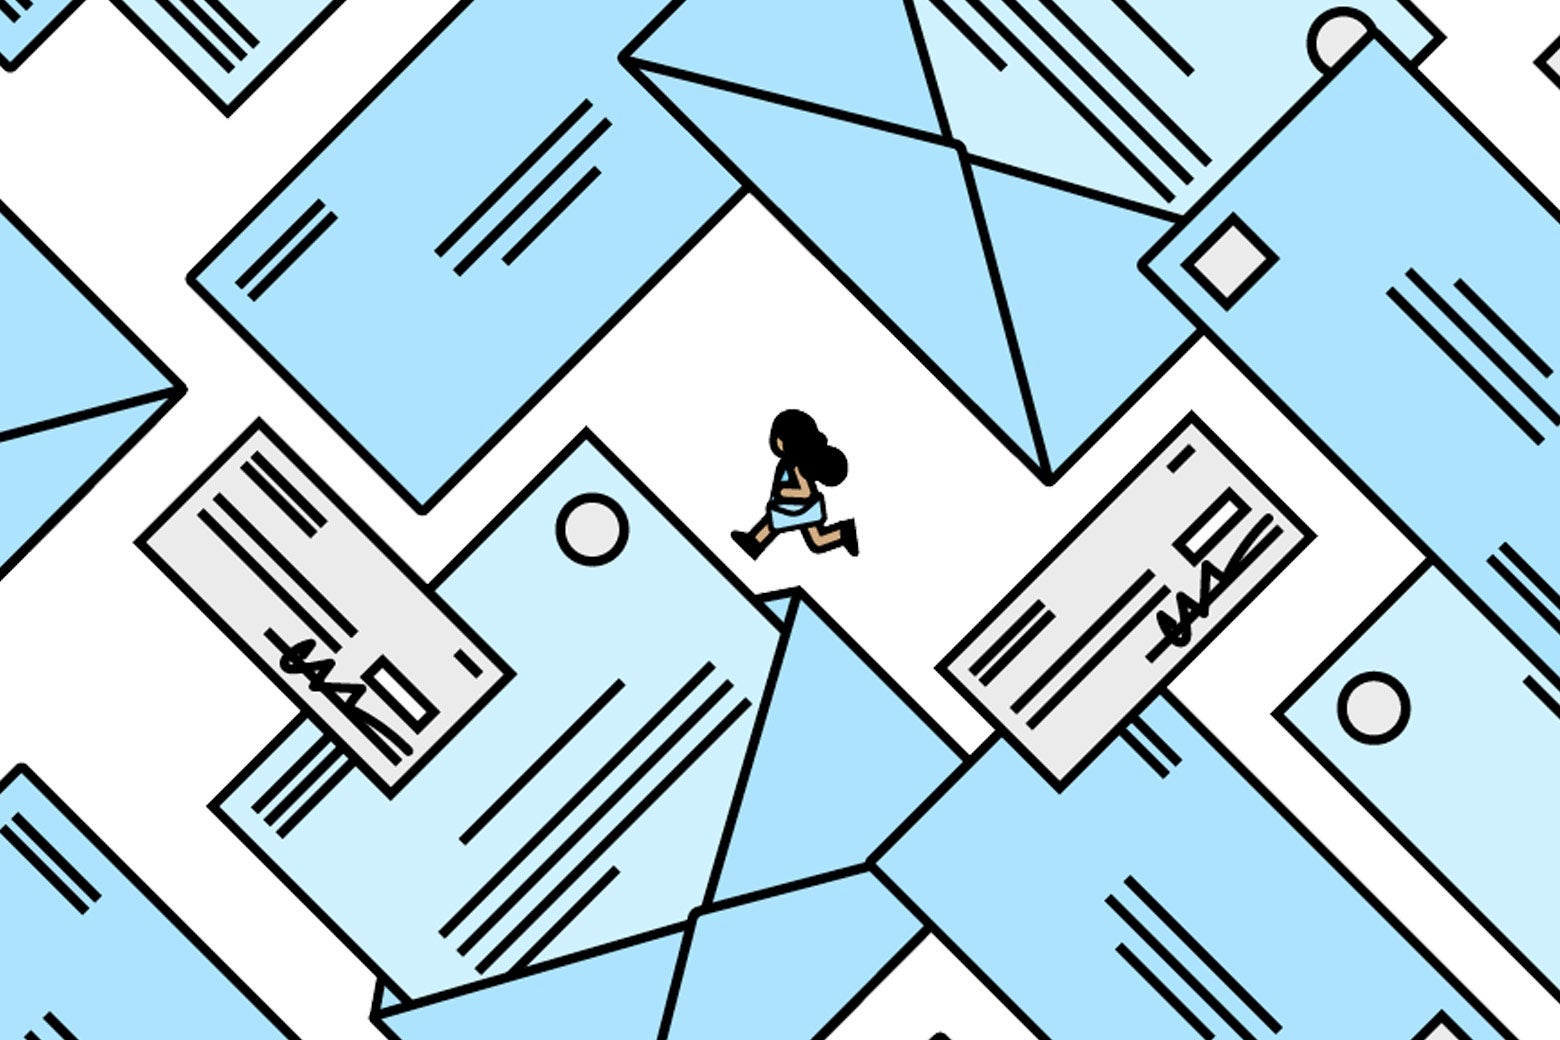 Illustration of a woman running amid an array of blue envelopes